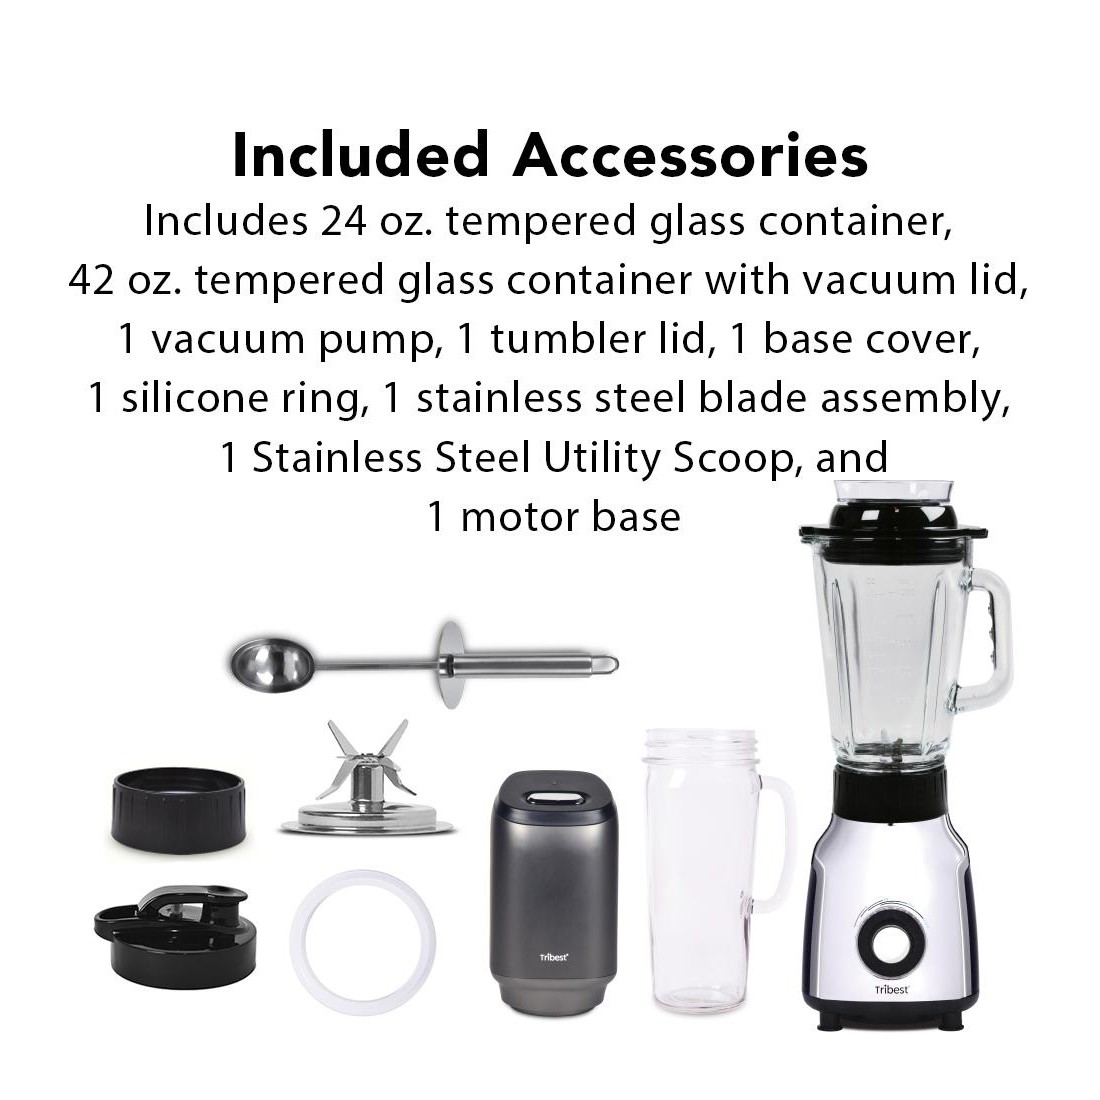 https://s3-assets.quenchessentials.com/media/images/products/tribest-glass-personal-vacuum-blender-pbg-5001-accessories.jpg